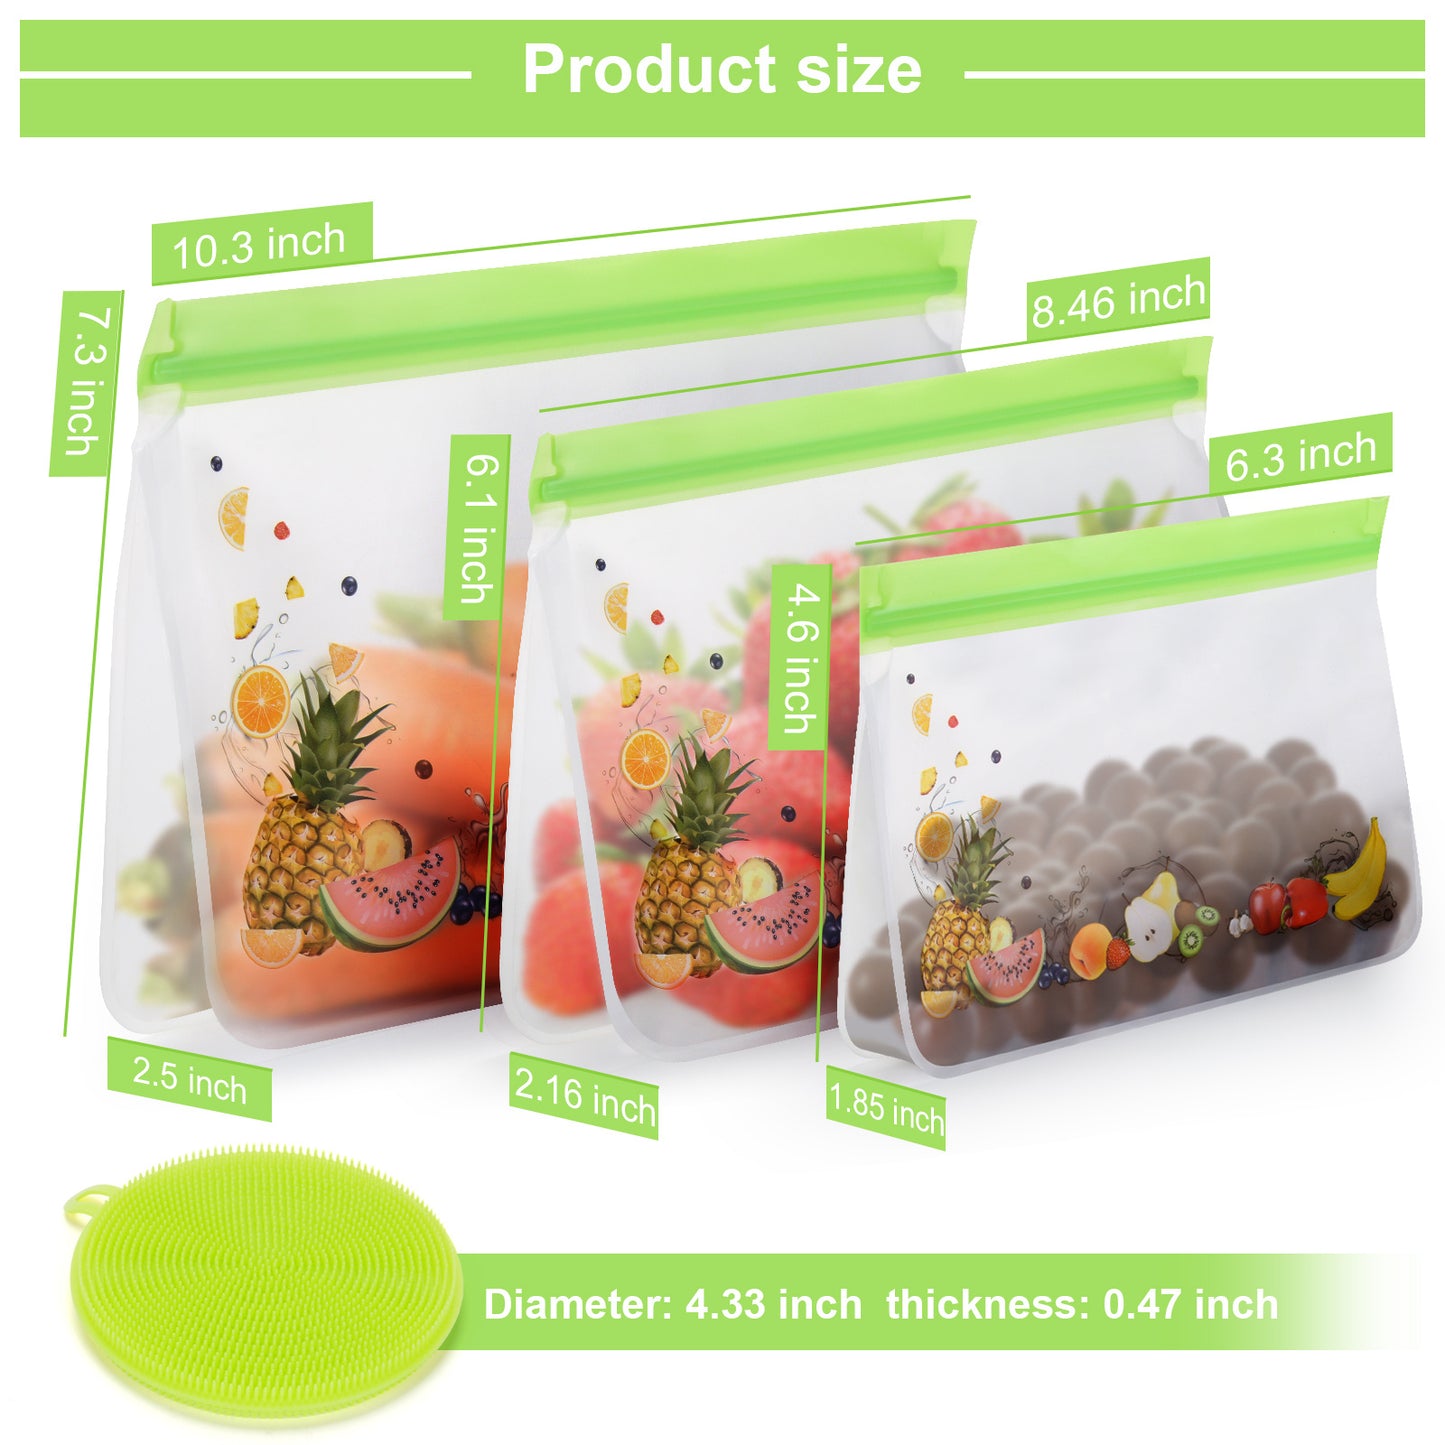 green Reusable Food Storage Bags Stand Up - 12 Pack Leakproof Freezer Bags - 4 Washable Gallon Bags + 4 Reusable Sandwich Bags + 4 Reusable Snack Bags - Lunch Bags for Fruits Meat Cereal Vegetable